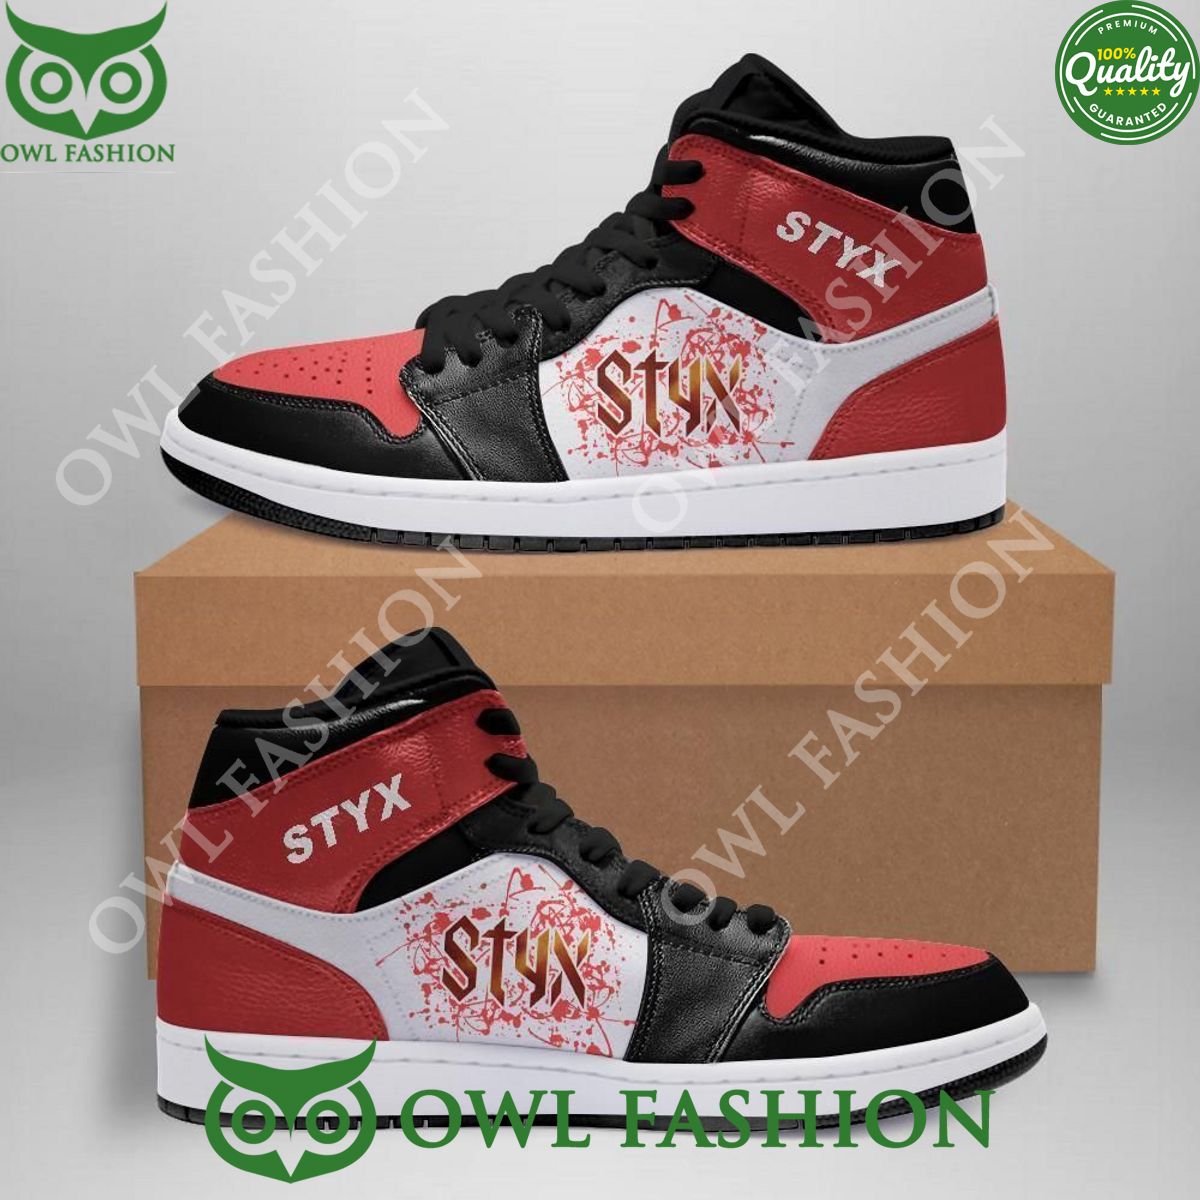 Styx Rock Band Limited Air Jordan High Top Shoes